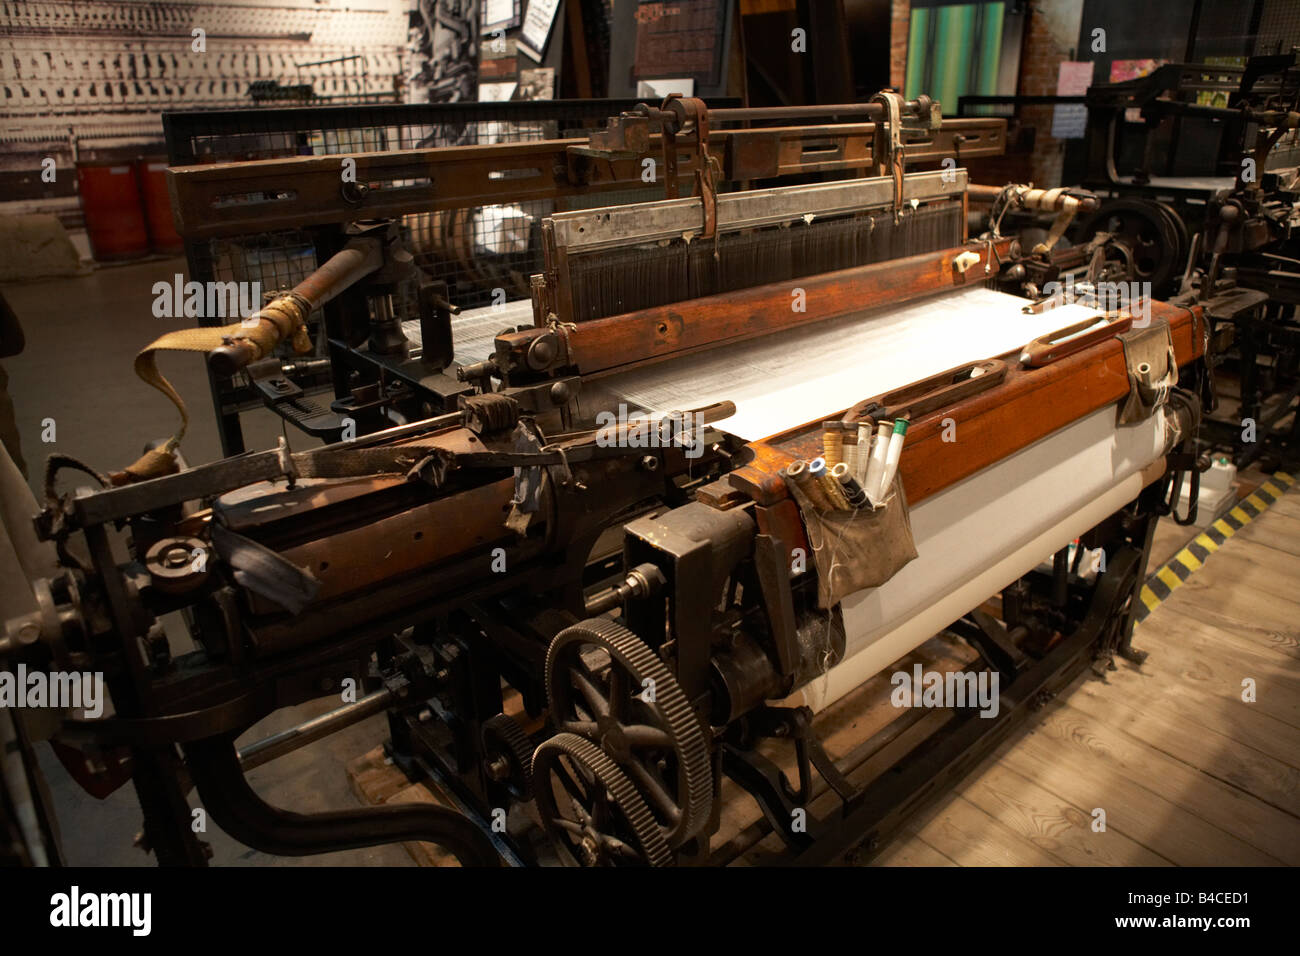 East Europe Poland West Mazovia Lodz antique loom in Industrial museum Manufaktura Shopping and entertainment complex Stock Photo